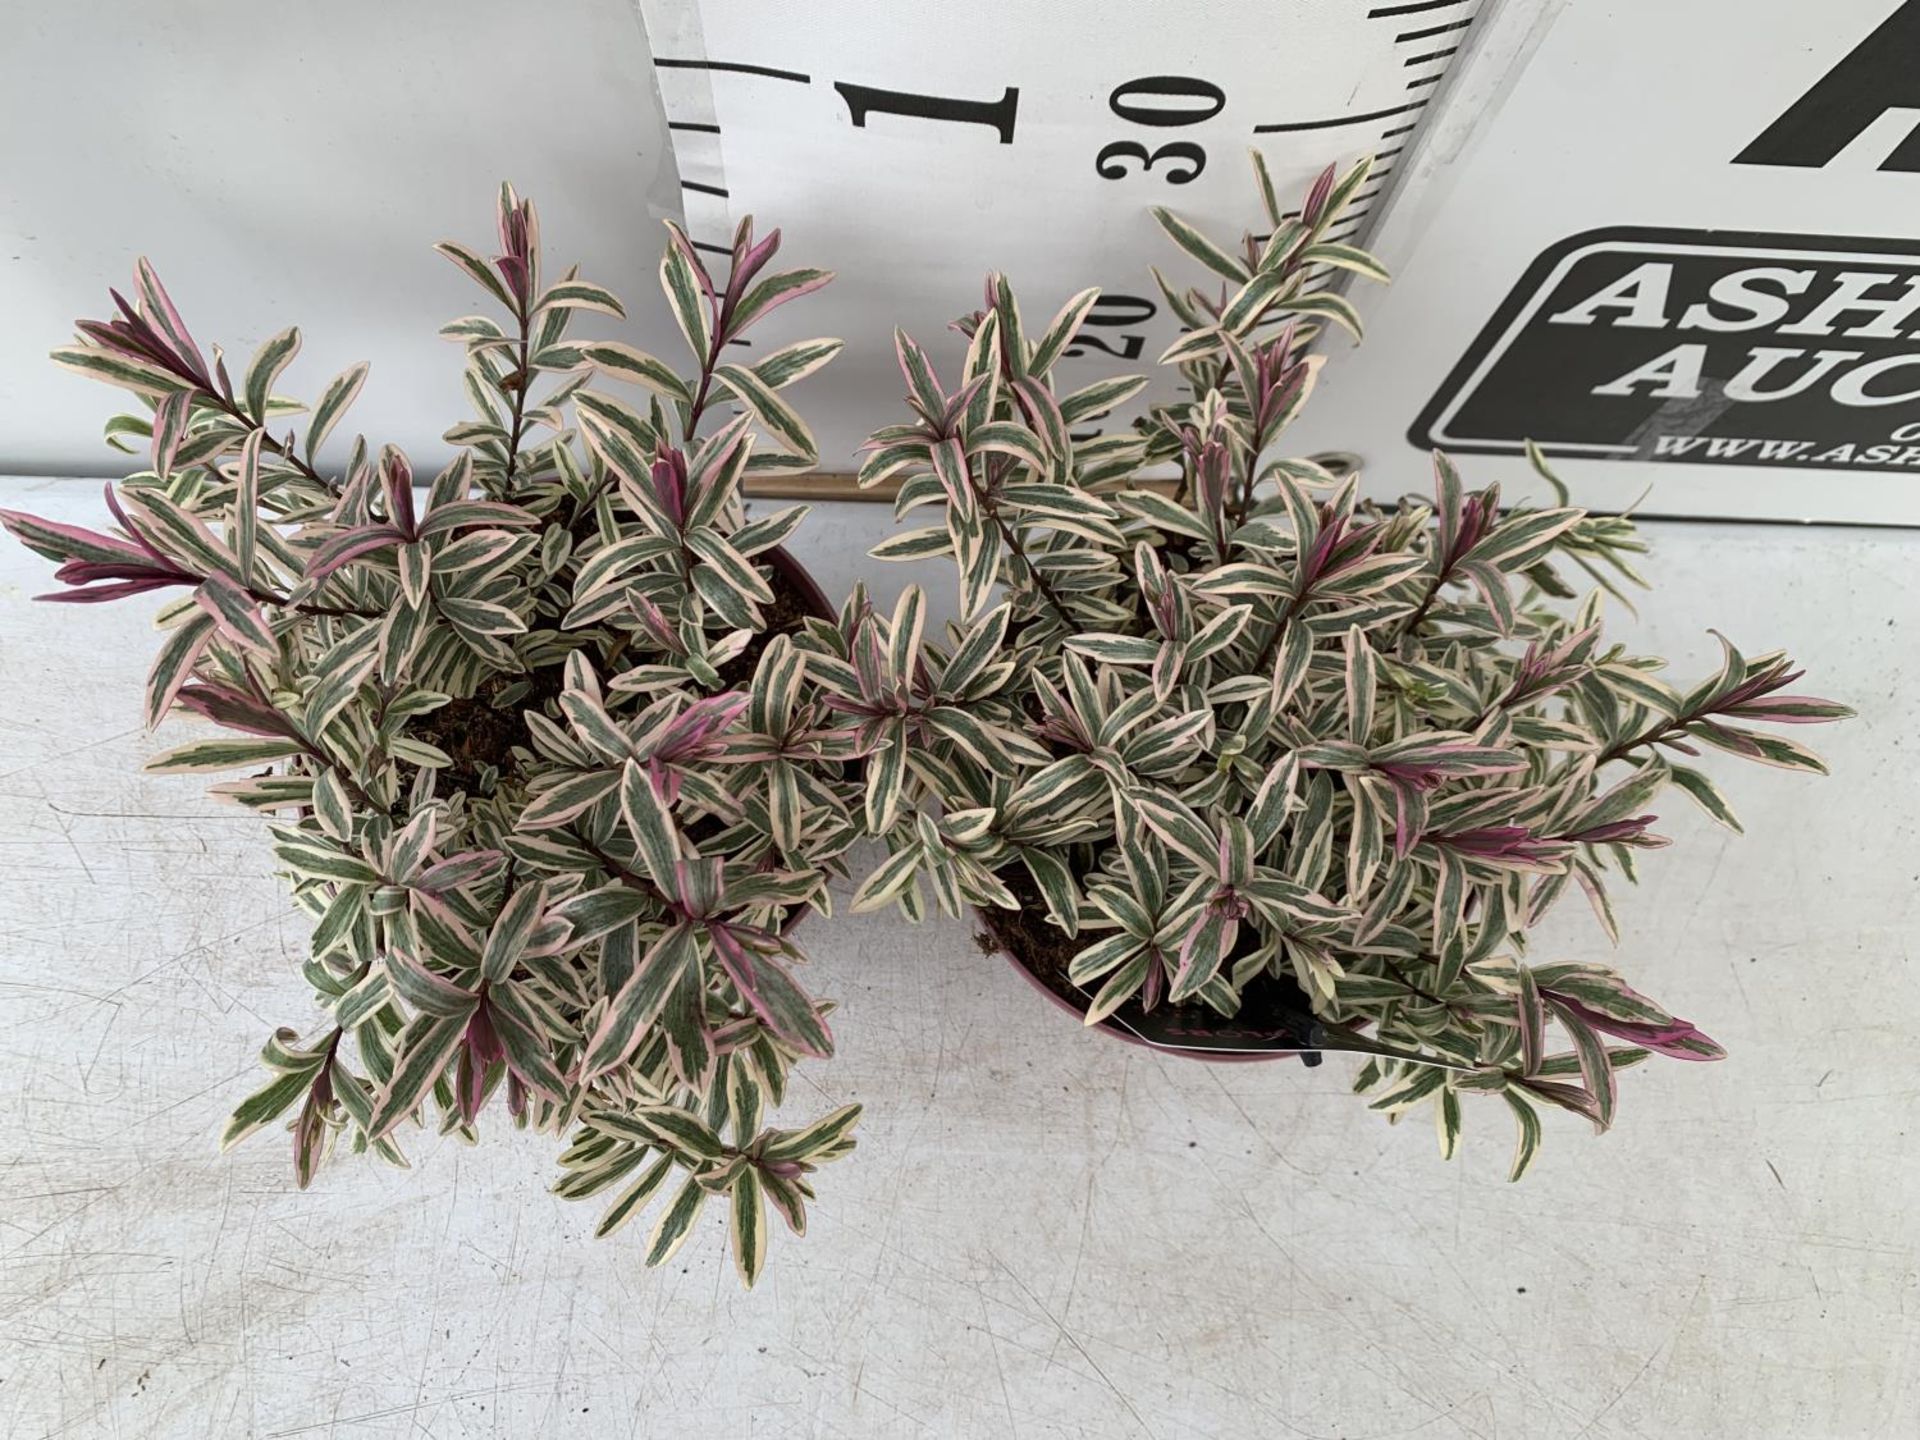 TWO HEBES MAGICOLOURS 'HEARTBREAKER' APPROX 30CM IN HEIGHT IN 2 LTR POTS PLUS VAT TO BE SOLD FOR THE - Image 2 of 5